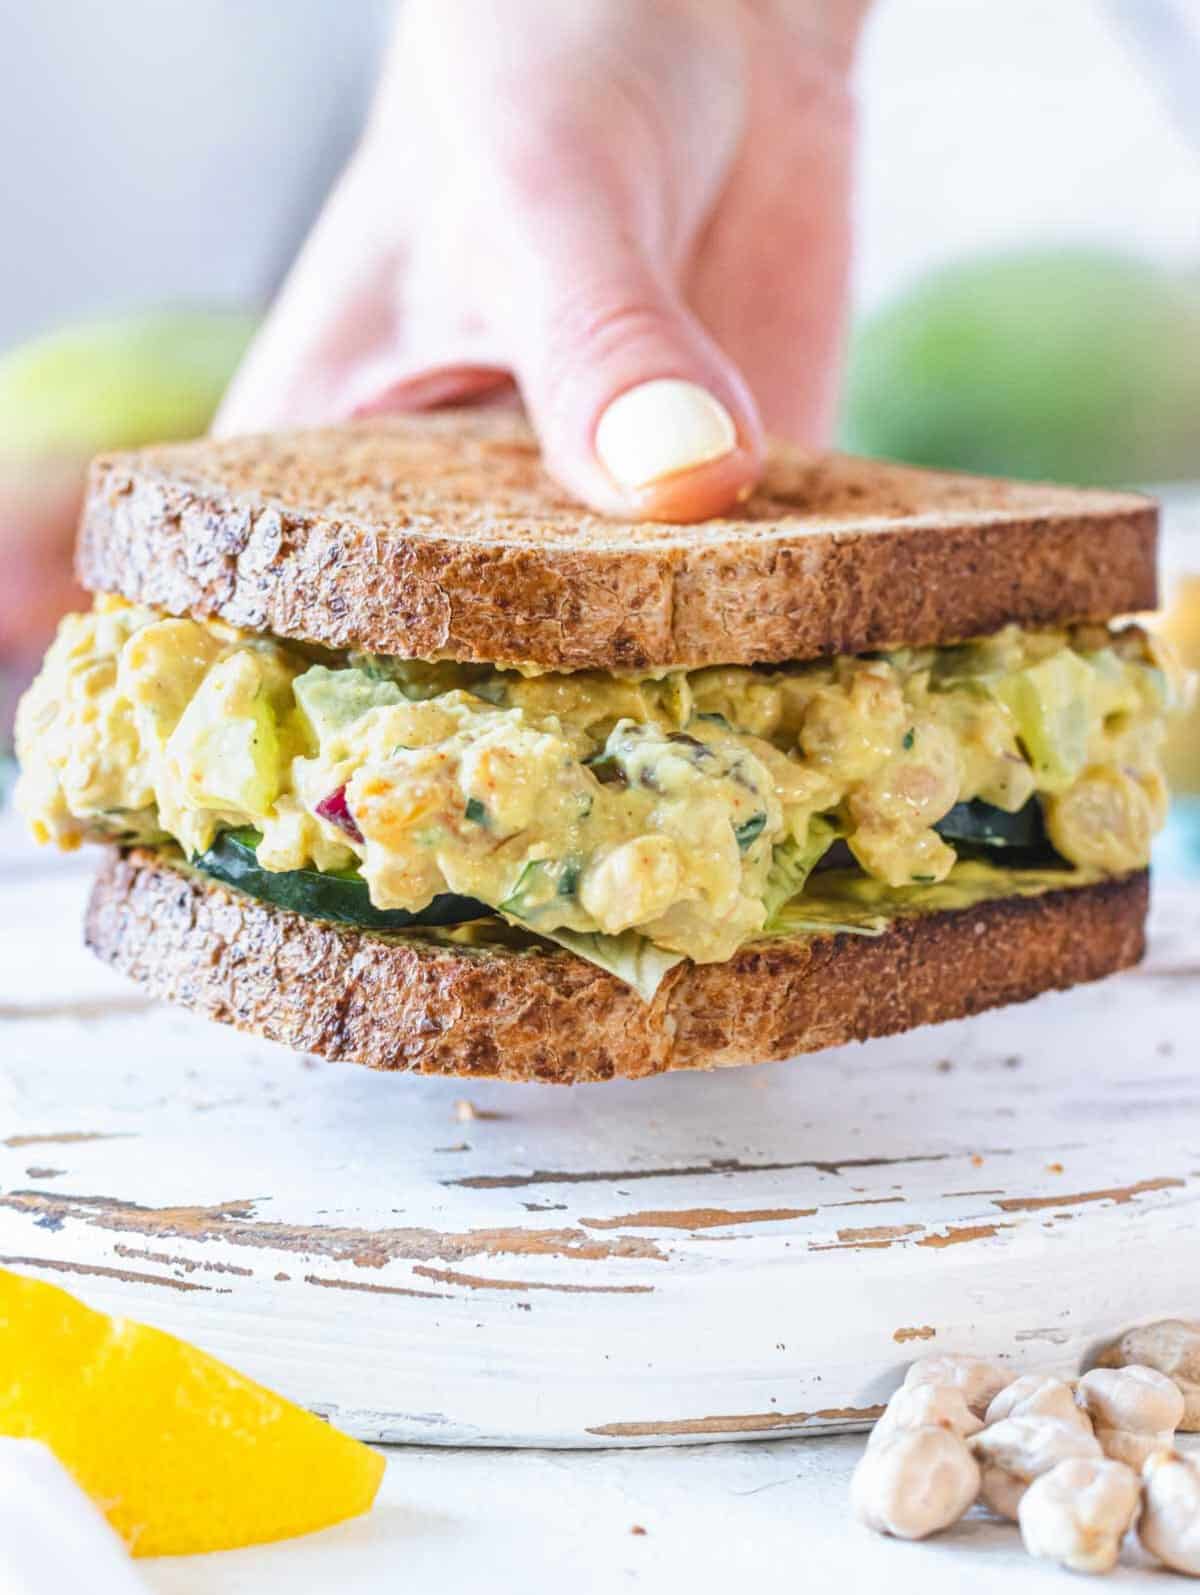 curry chickpea salad sandwich and a hand